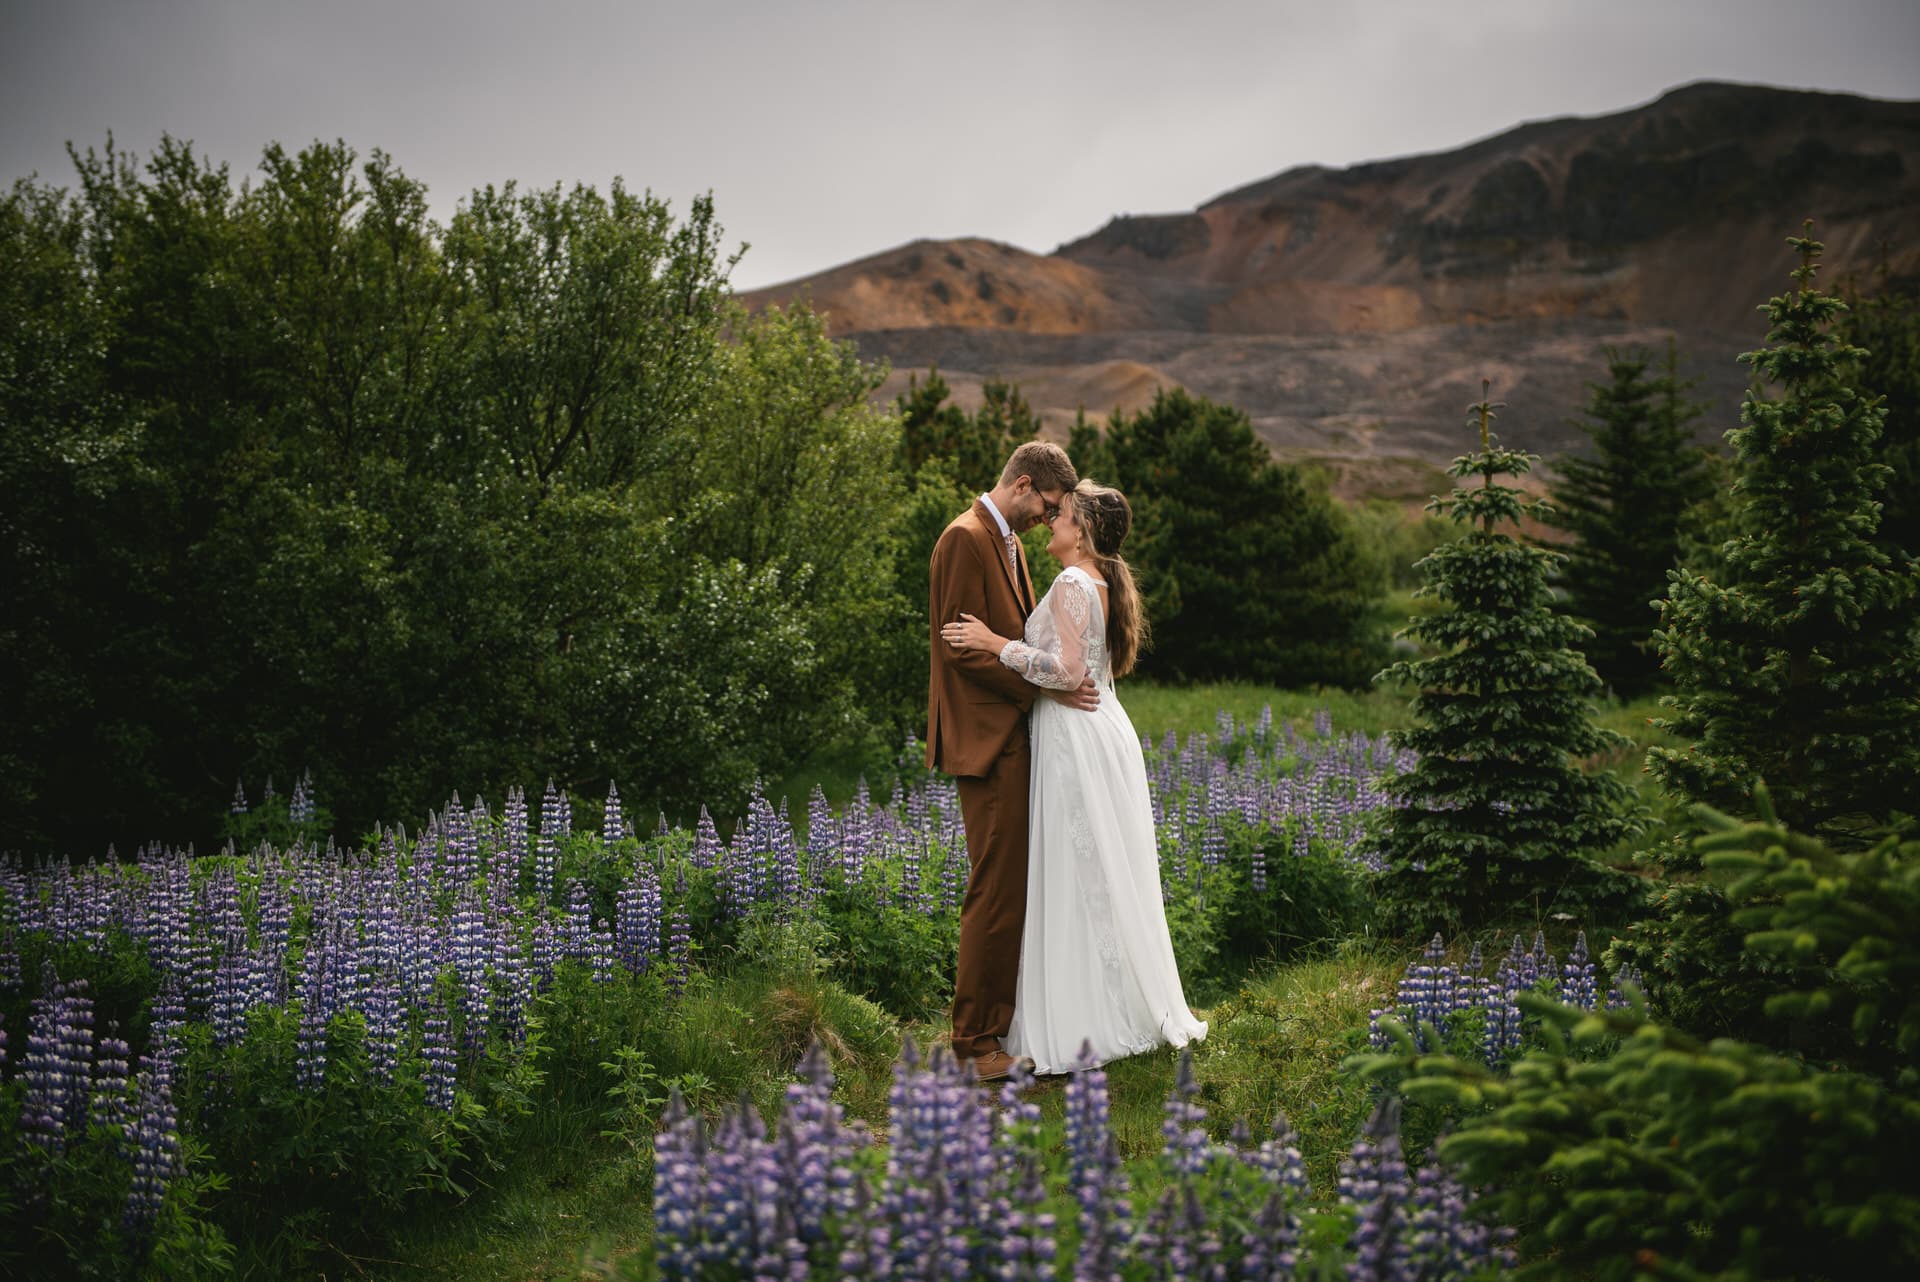 Bride and groom surrounded by the wildflowers of the Westfjords' meadows.